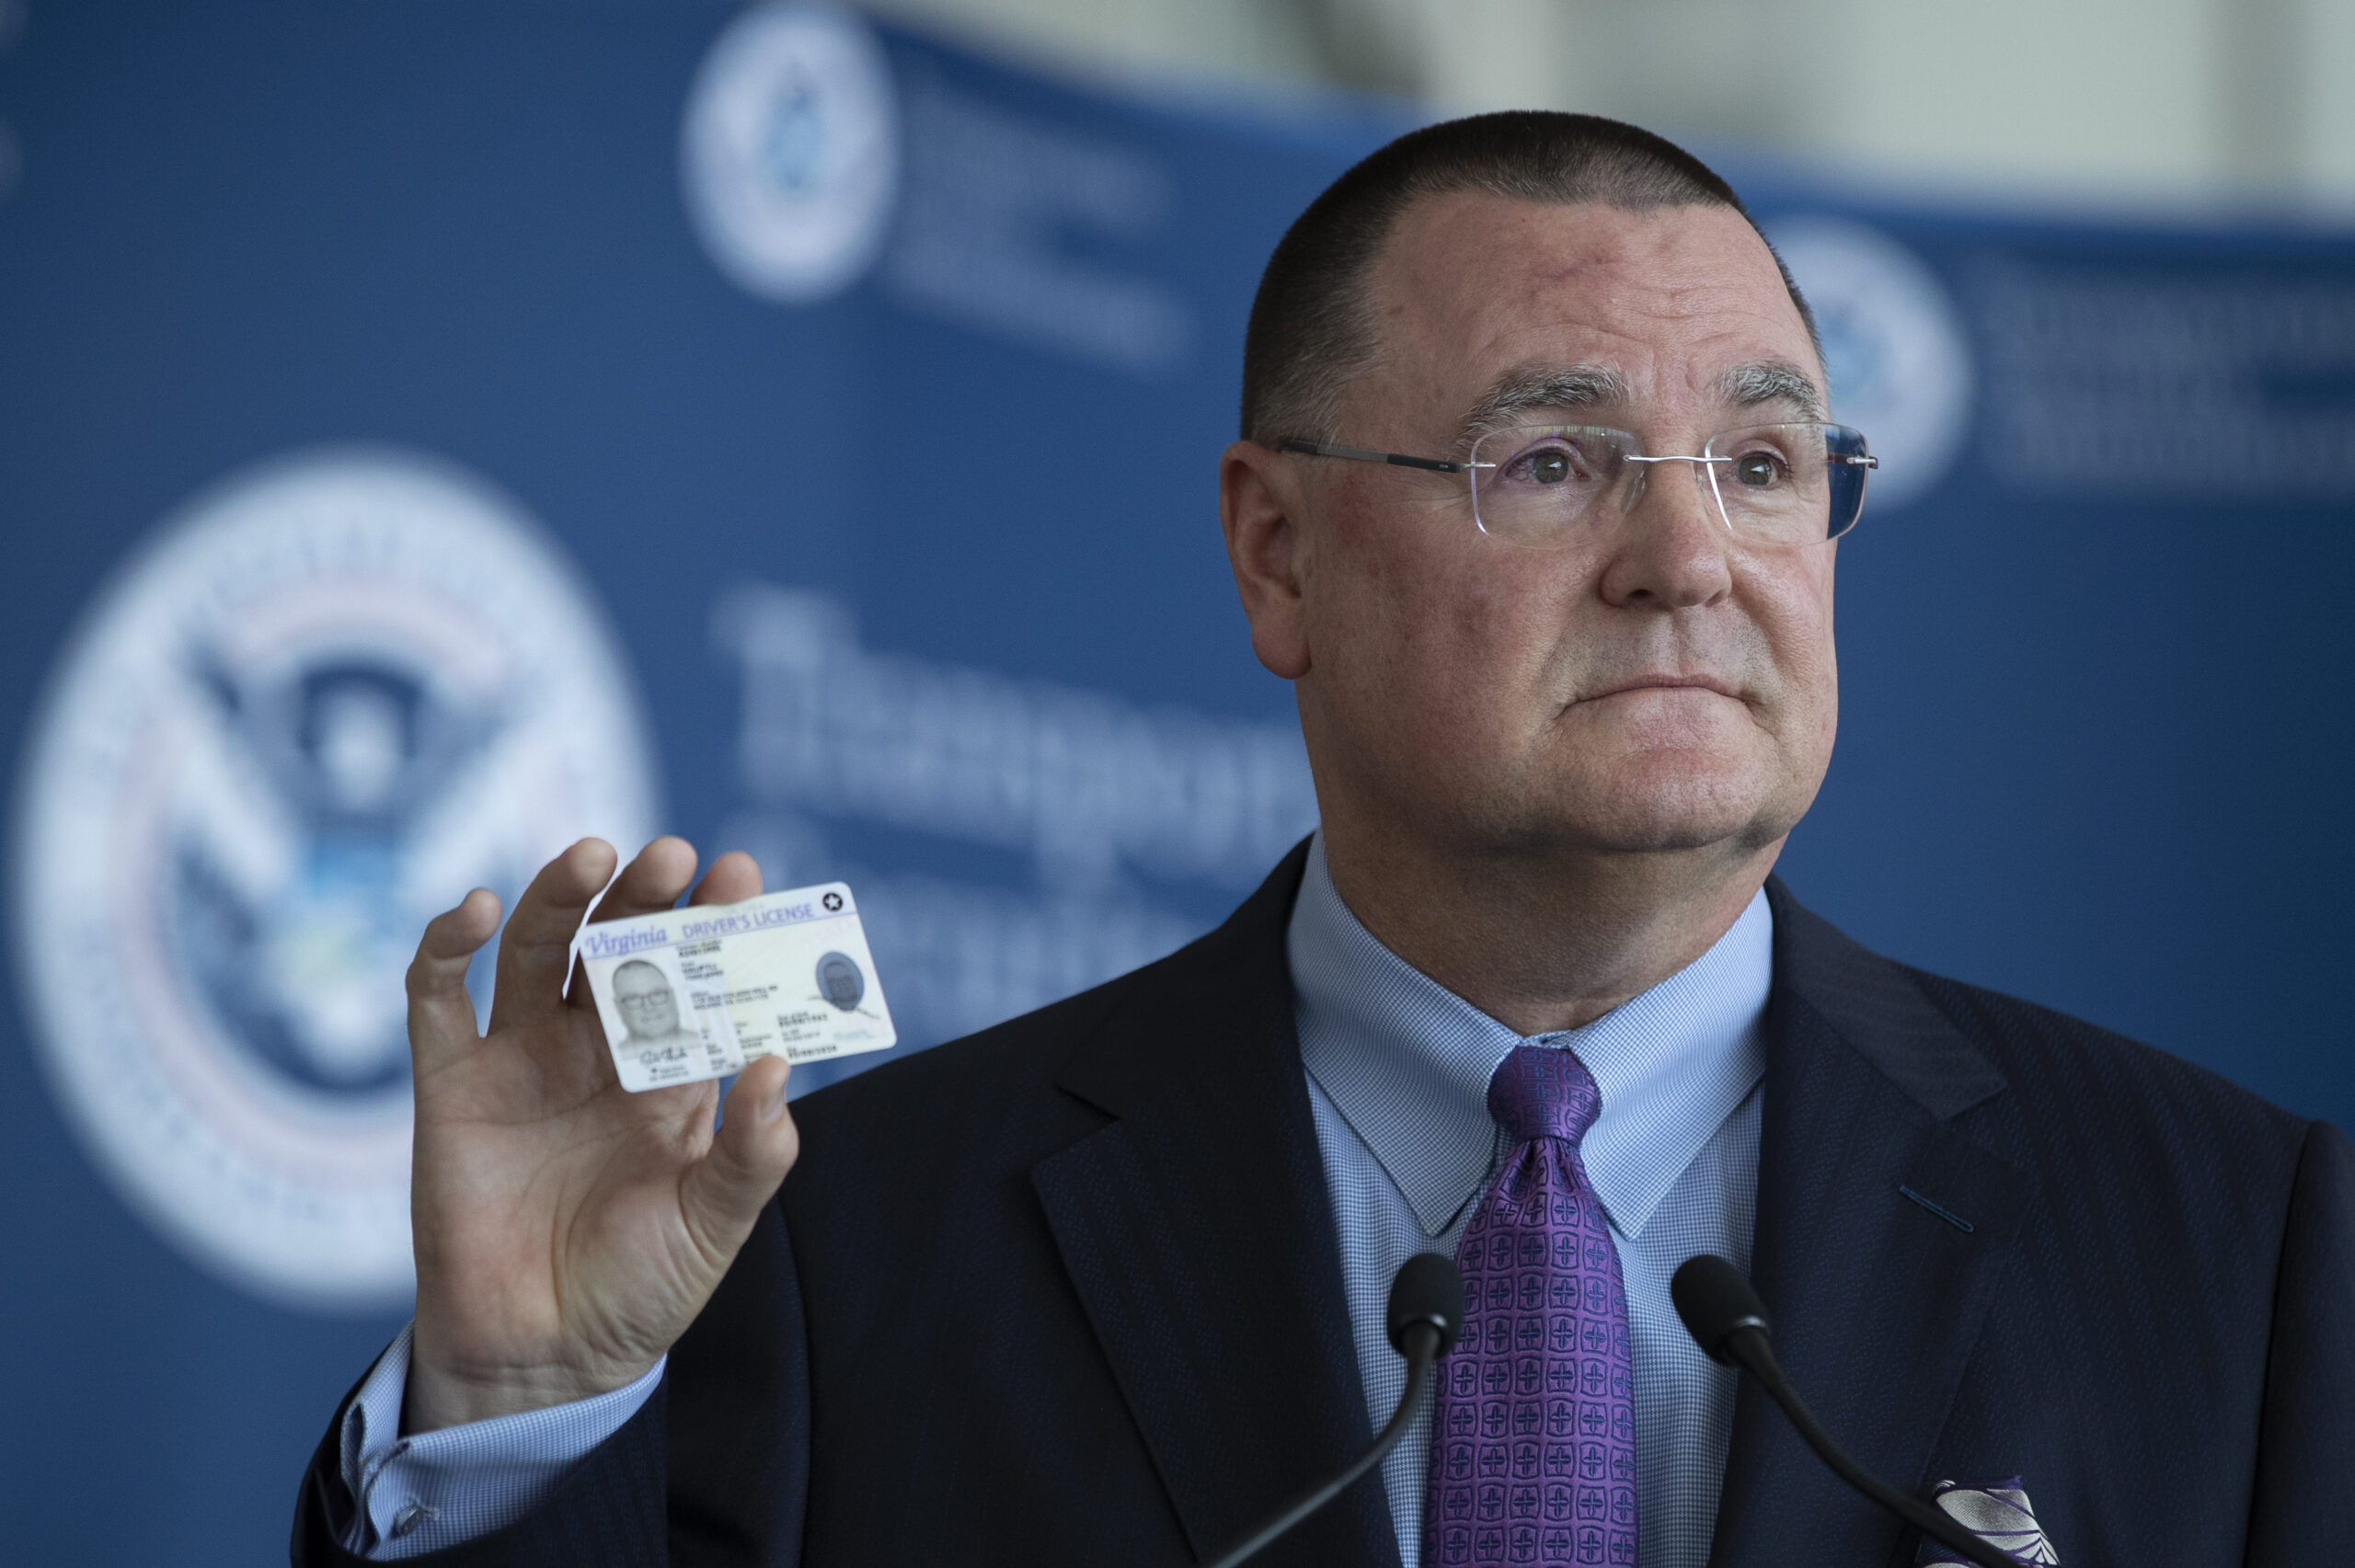 Dhs Announces Deadline For Real Id Cards Has Been Extended For A Third